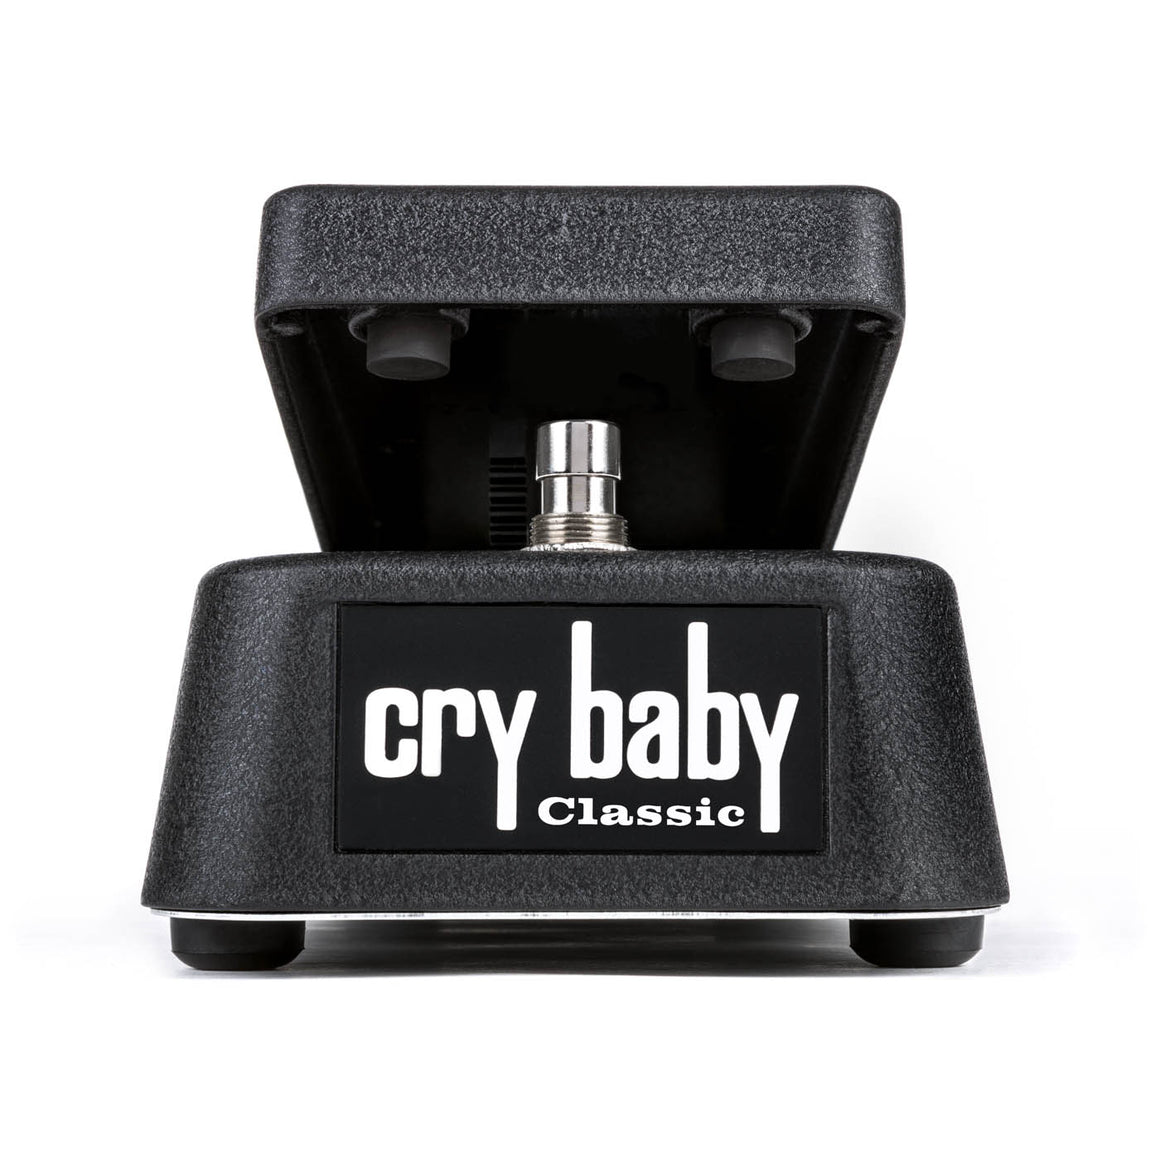 DUNLOP GCB95F Cry Baby Classic Wah Wah Effects Pedal